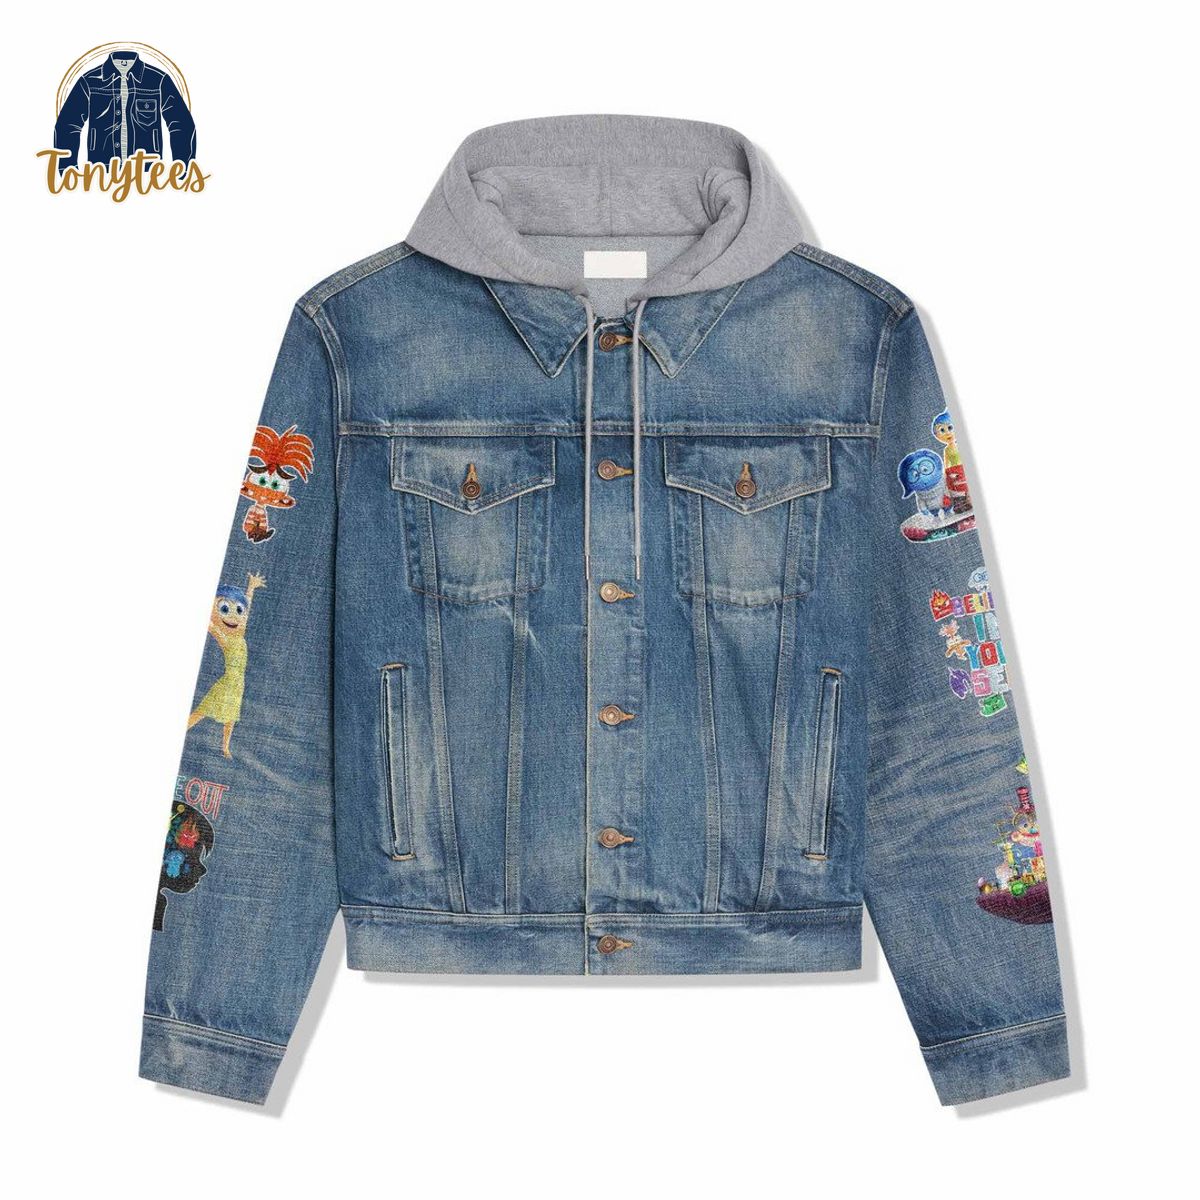 Inside Out 2 It’s Okay To Feel All The Feels Hooded Denim Jacket